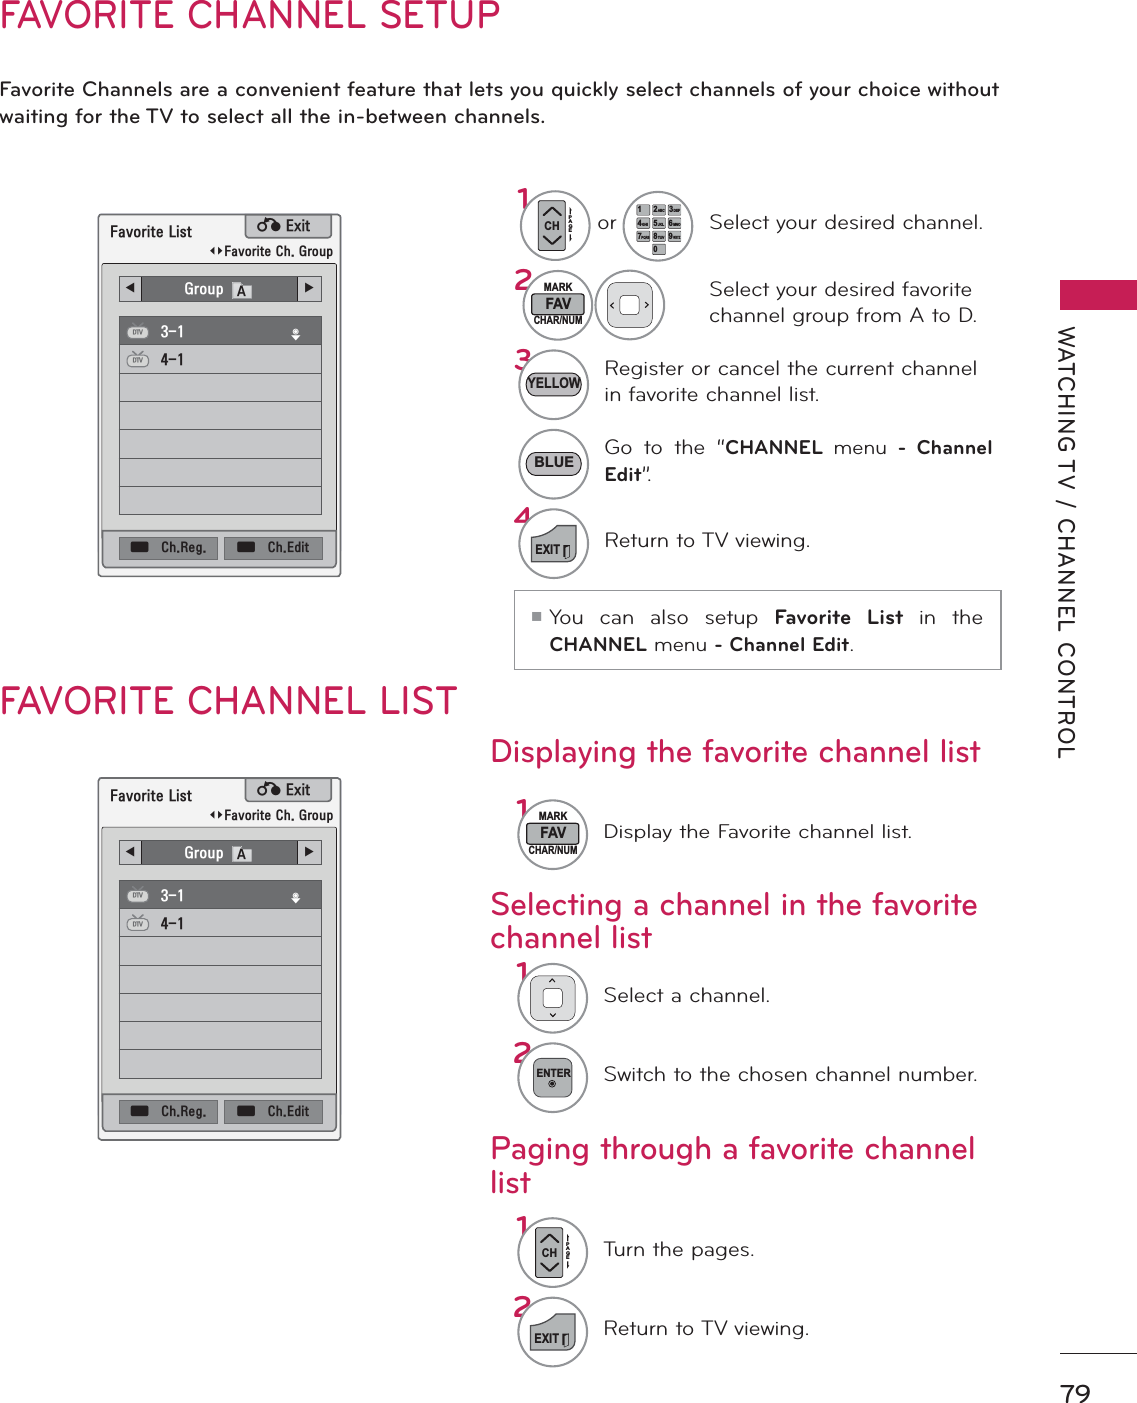 79WATCHING TV / CHANNEL CONTROLFAVORITE CHANNEL SETUPFavorite Channels are a convenient feature that lets you quickly select channels of your choice without waiting for the TV to select all the in-between channels.1FAVMARKCHAR/NUMDisplay the Favorite channel list.1Select a channel.2ENTERSwitch to the chosen channel number.1CHPAGETurn the pages.2EXITReturn to TV viewing.ᯚᯛ)DYRULWH&amp;K*URXSᯚᯛ)DYRULWH&amp;K*URXS)DYRULWH/LVW)DYRULWH/LVWᰙ([LWᰙ([LW܁*URXS$۽܁*URXS$۽DTVDTVDTVDTVᯕ&amp;K5HJᯕ&amp;K5HJᯕ&amp;K(GLWᯕ&amp;K(GLWFAVORITE CHANNEL LISTSelecting a channel in the favorite channel listPaging through a favorite channel listDisplaying the favorite channel list12 ABC3 DEF4 GHI5 JKL6 MNO7PQRS8 TUV09 WXYZ1orCHPAGESelect your desired channel.2FAVMARKCHAR/NUMSelect your desired favorite channel group from A to D.3Register or cancel the current channel in favorite channel list.Go to the “CHANNEL  menu - Channel Edit”.4EXITReturn to TV viewing.YELLOWBLUEᯫ You can also setup Favorite List in the CHANNEL menu - Channel Edit.ᯱᯙᯱᯙ